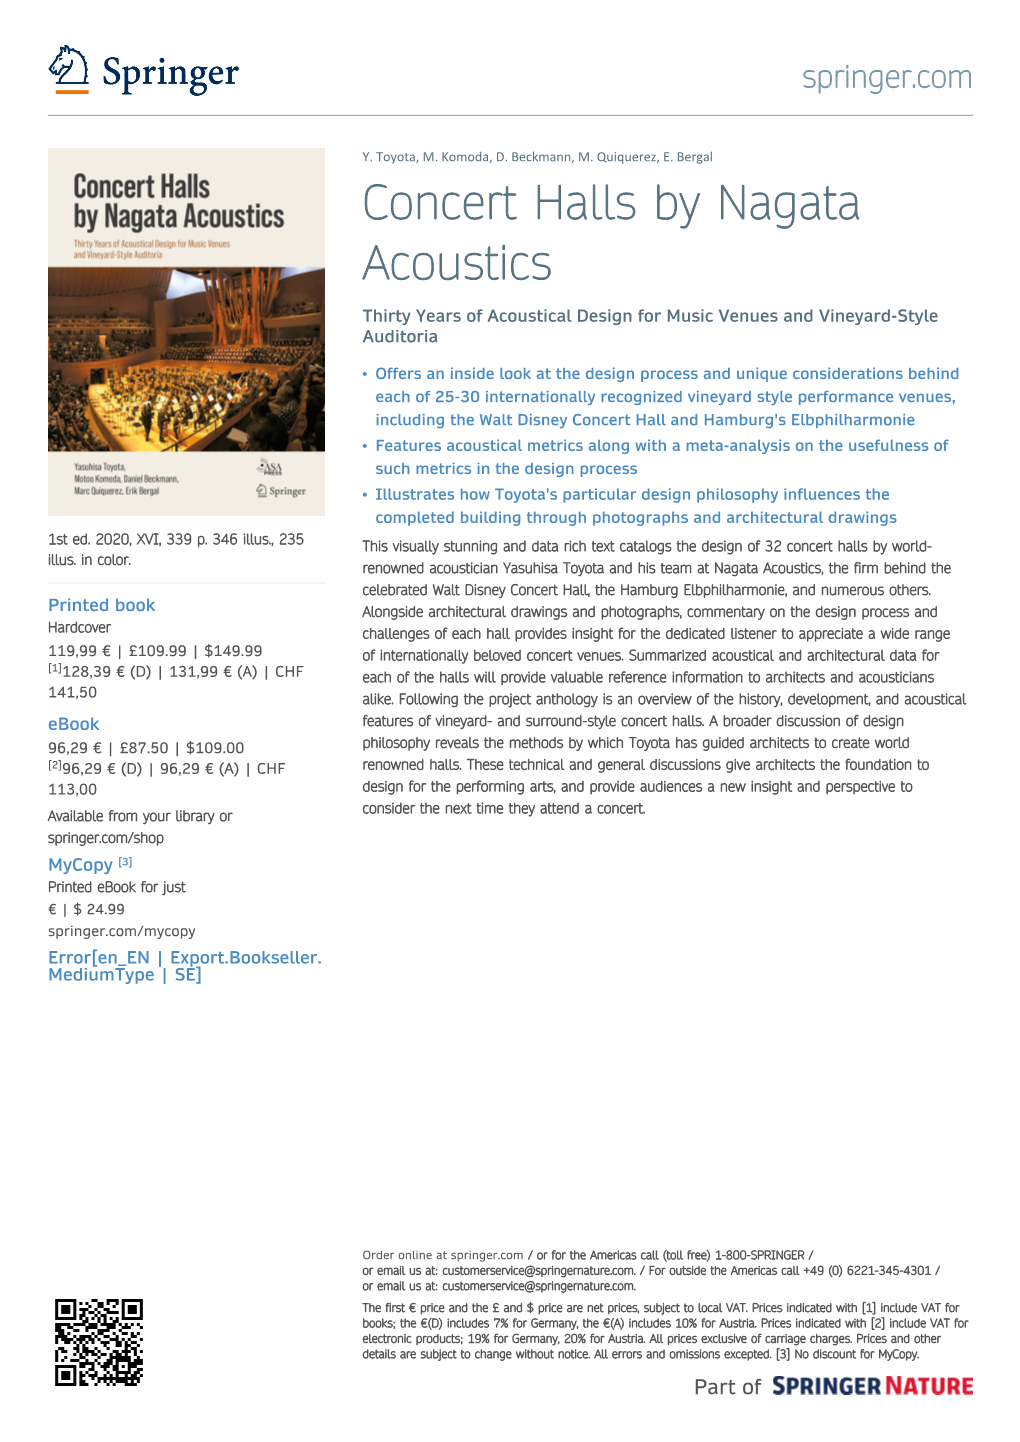 Concert Halls by Nagata Acoustics Thirty Years of Acoustical Design for Music Venues and Vineyard-Style Auditoria